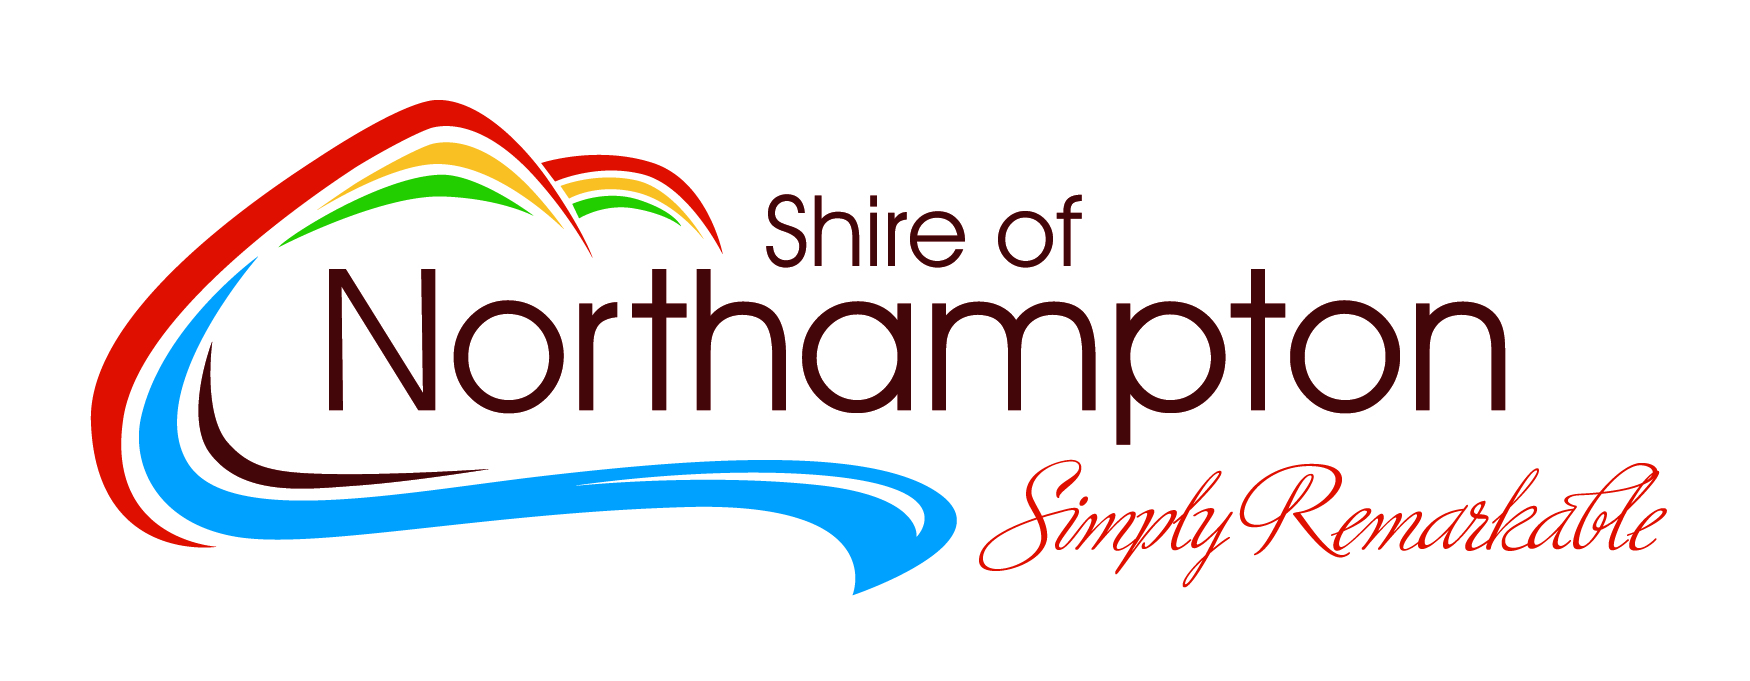 Administration/Library Position - Northampton